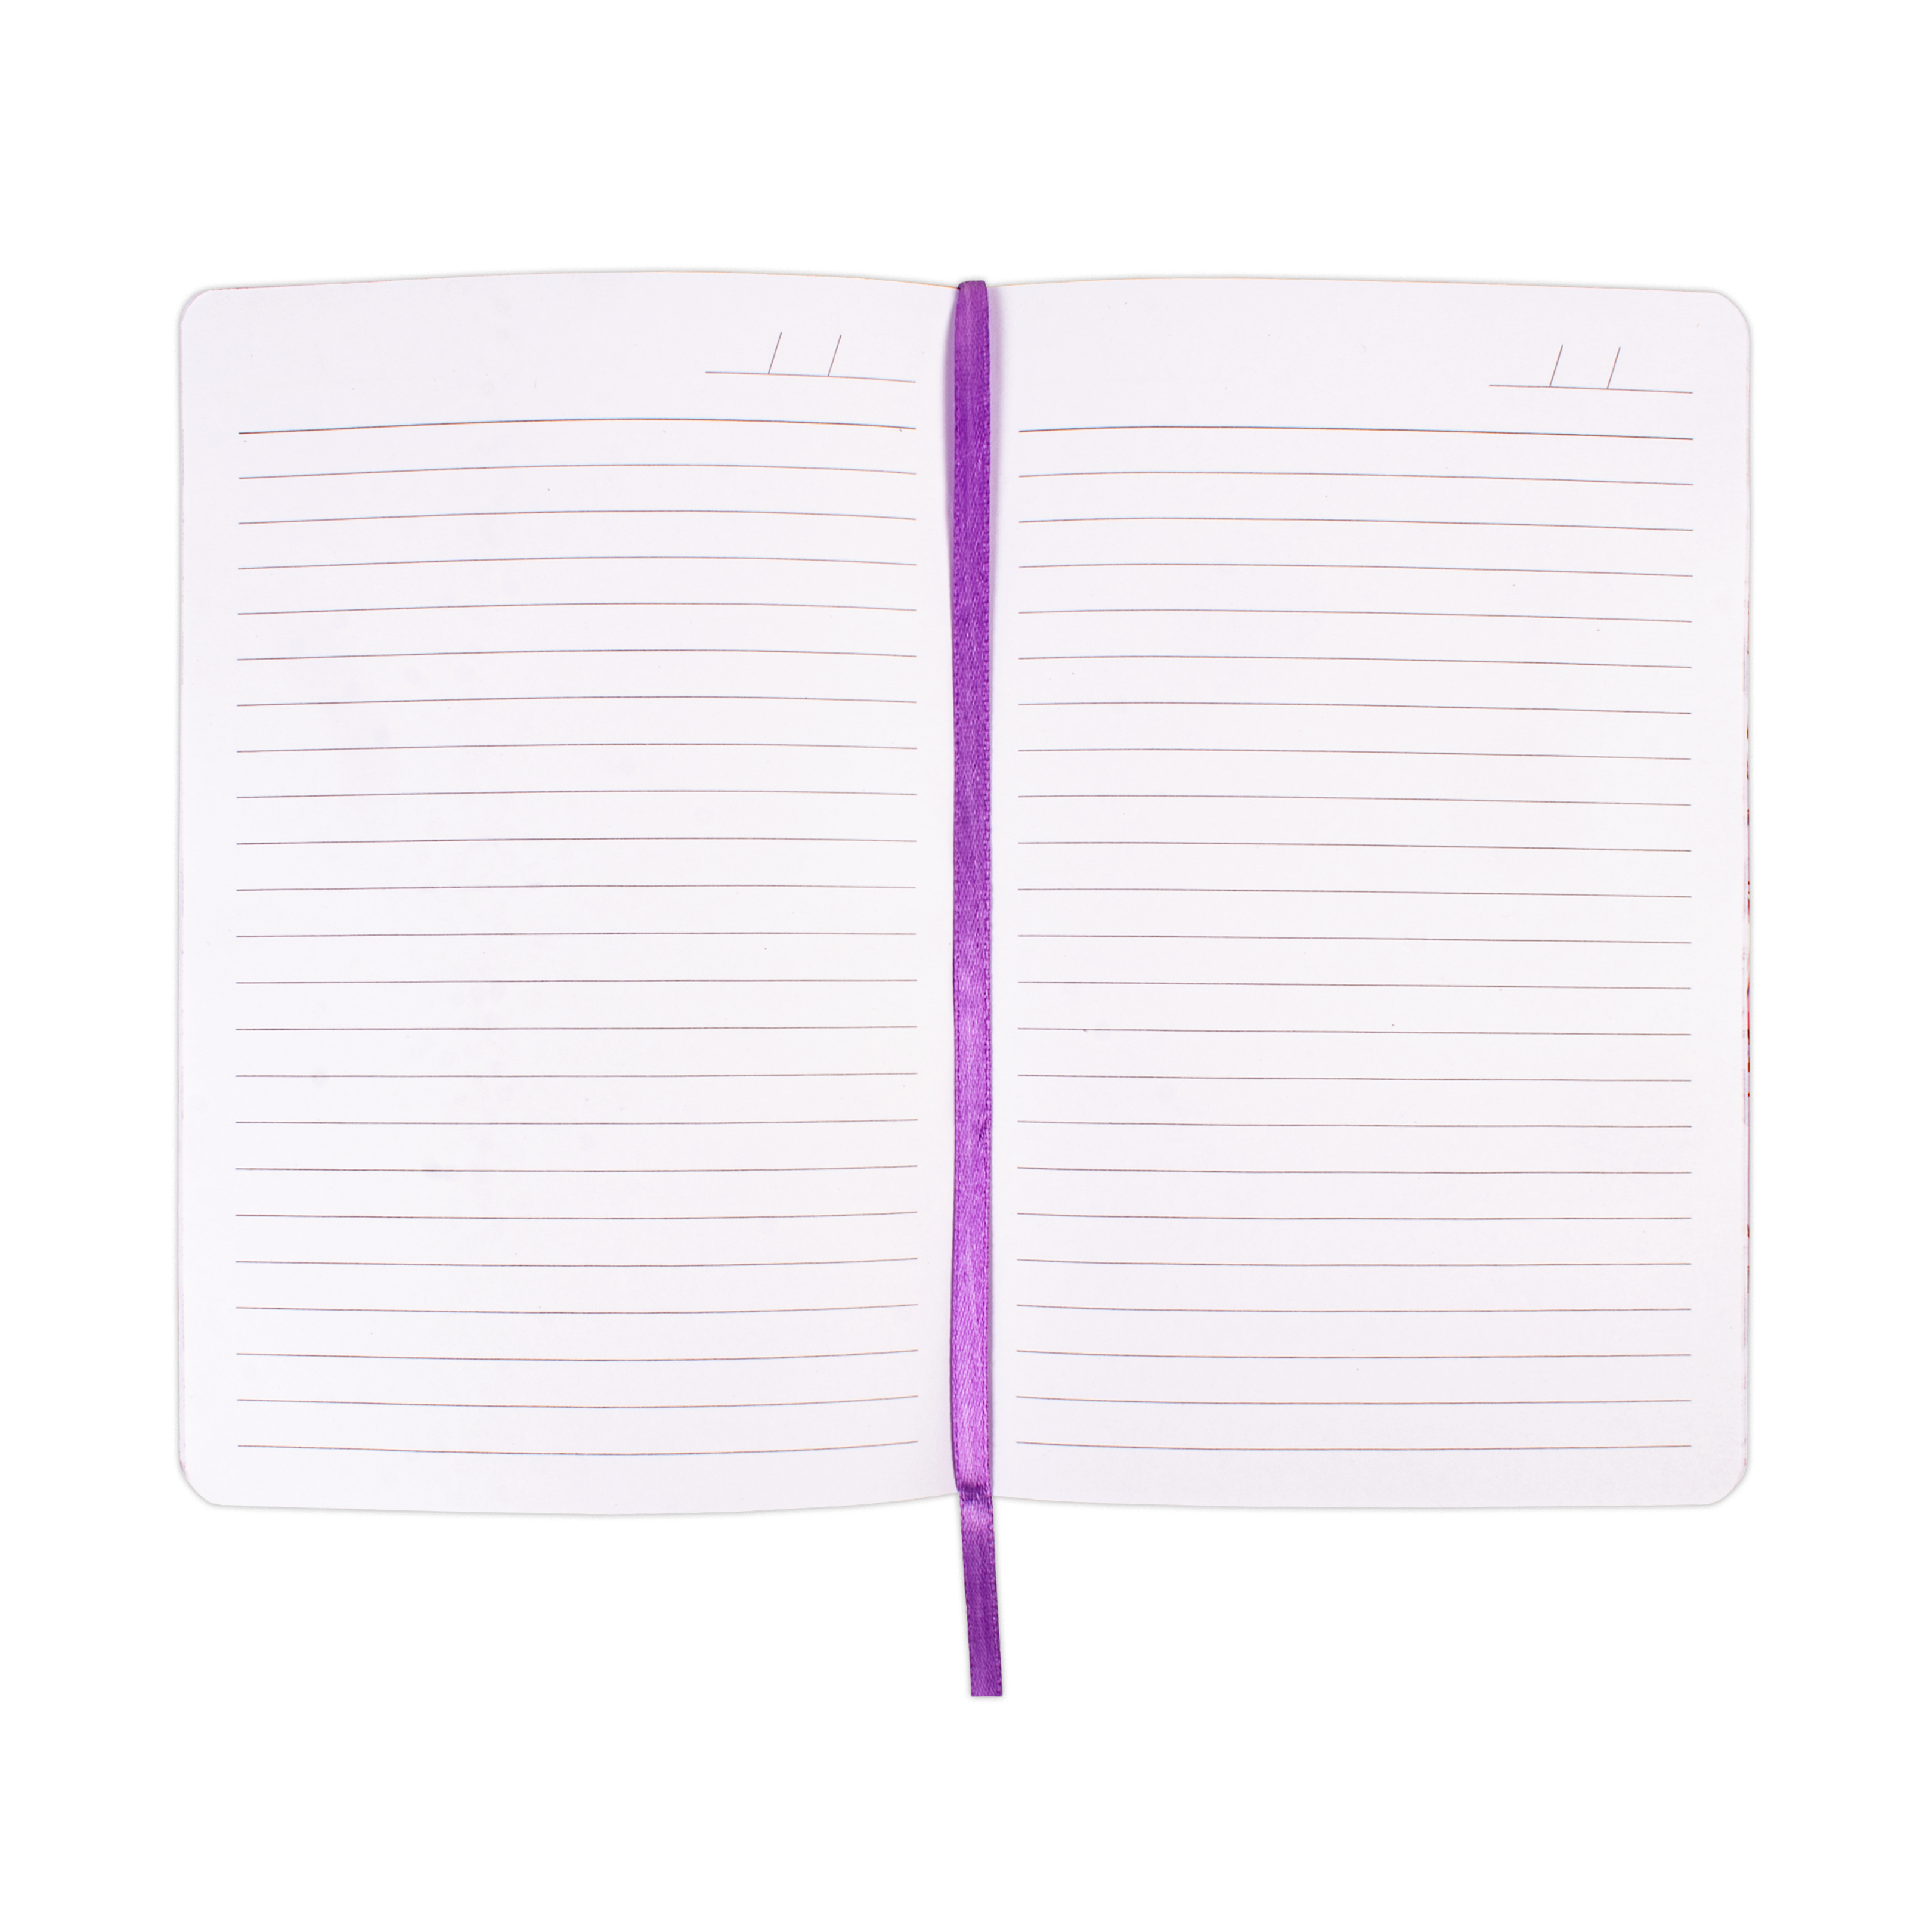 Hardbound Ruled Notebook Follow Your Dreams Edge Printed With Elastic Band 140mm X 210mm 192pages 100gsm